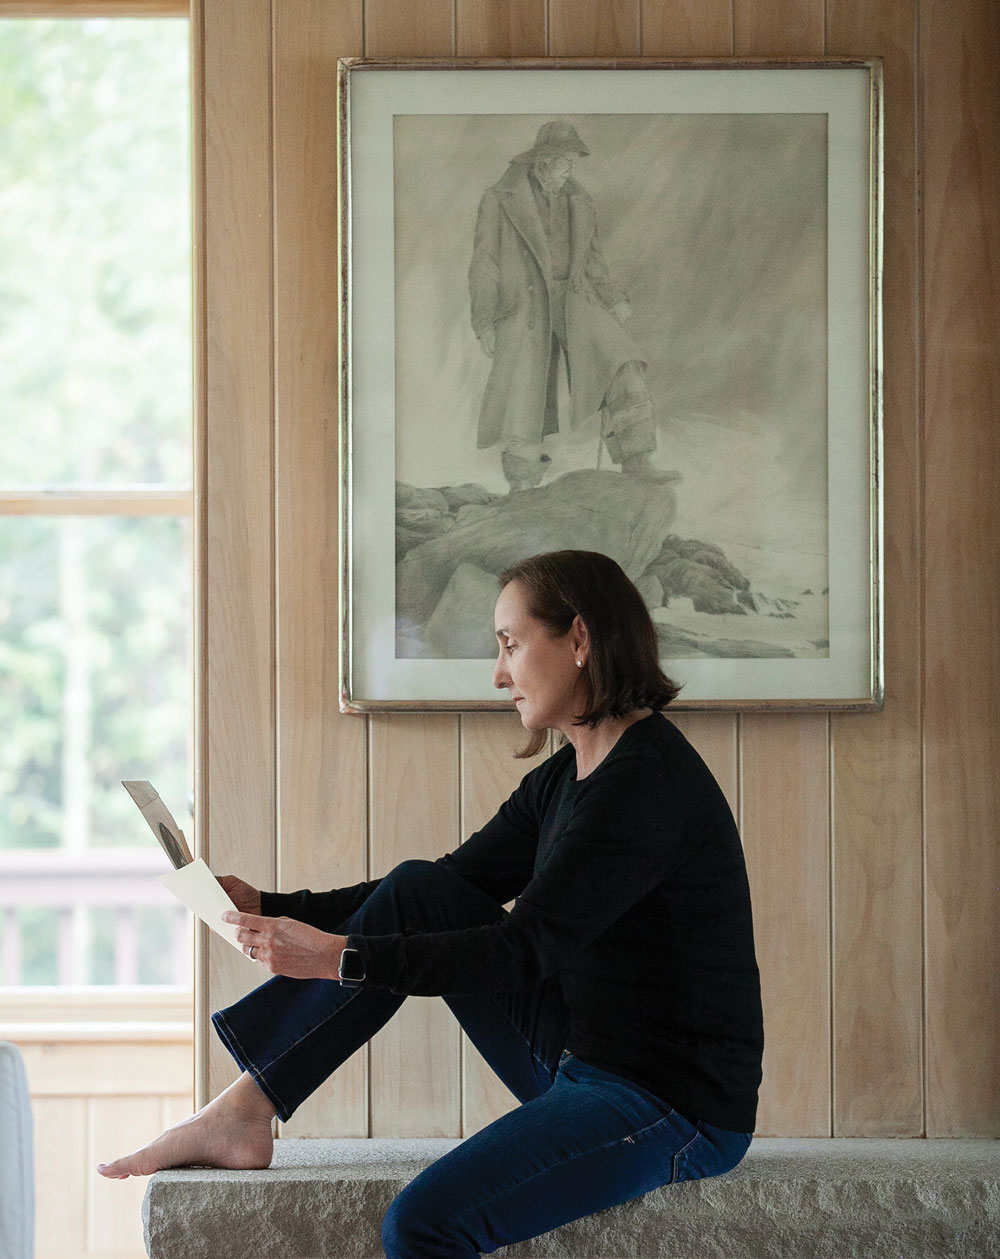 In her Pemaquid home, Jamie Hanna examines sketches by her father, David Hanna, whose untitled pencil drawing hangs on the wall.